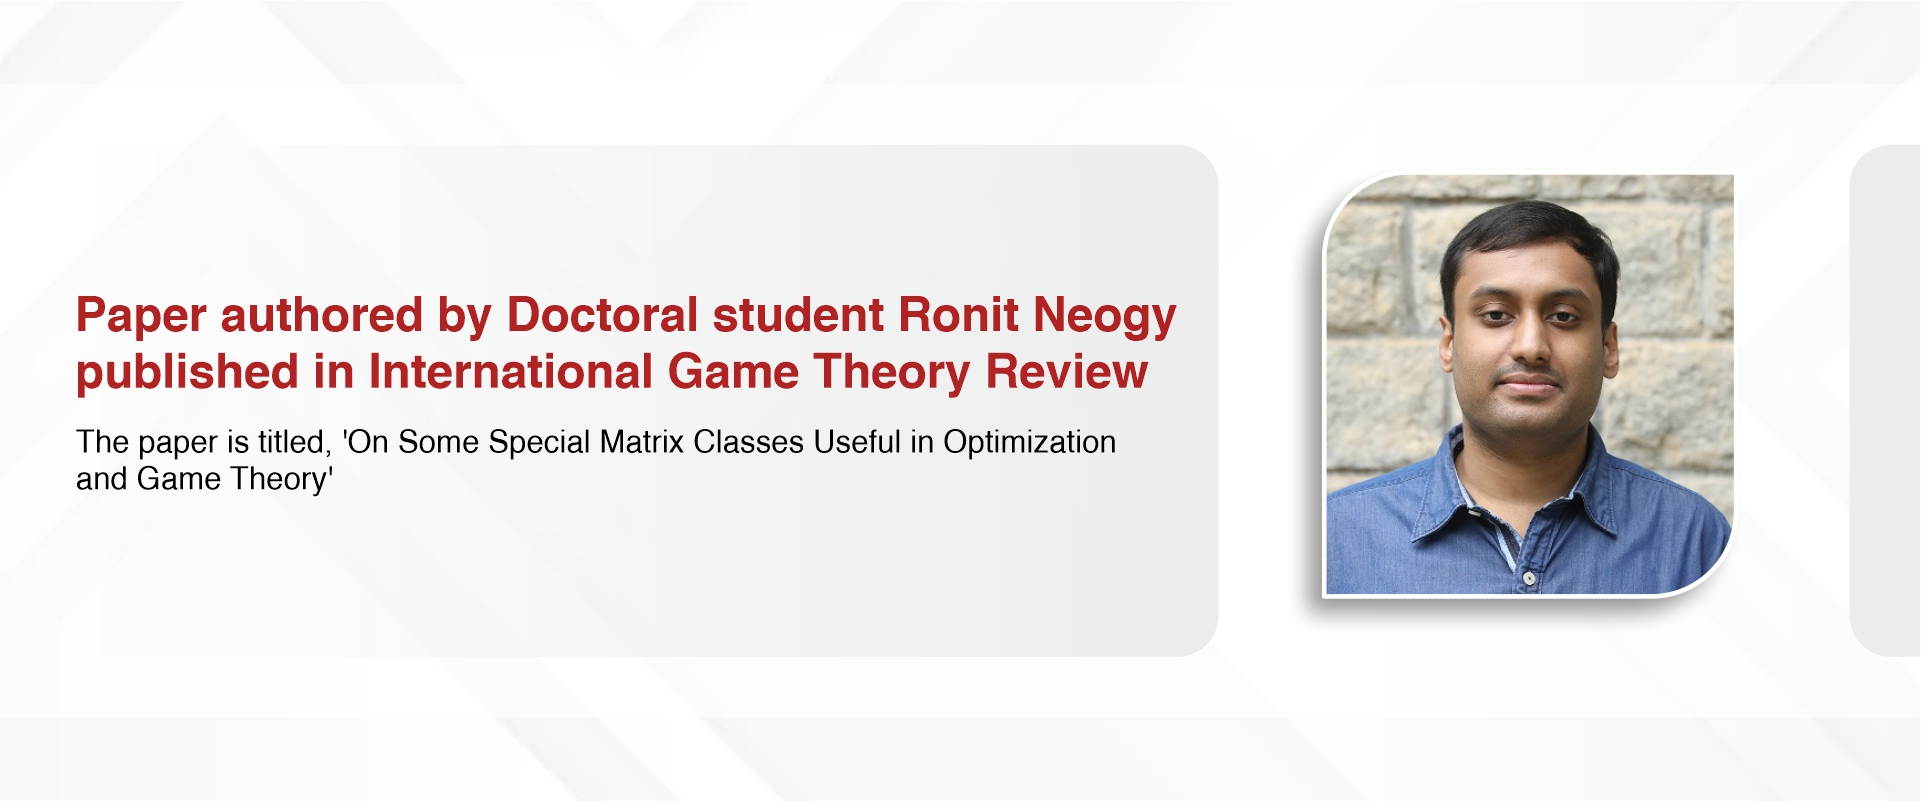 Paper authored by Doctoral student Ronit Neogy published in International Game Theory Review